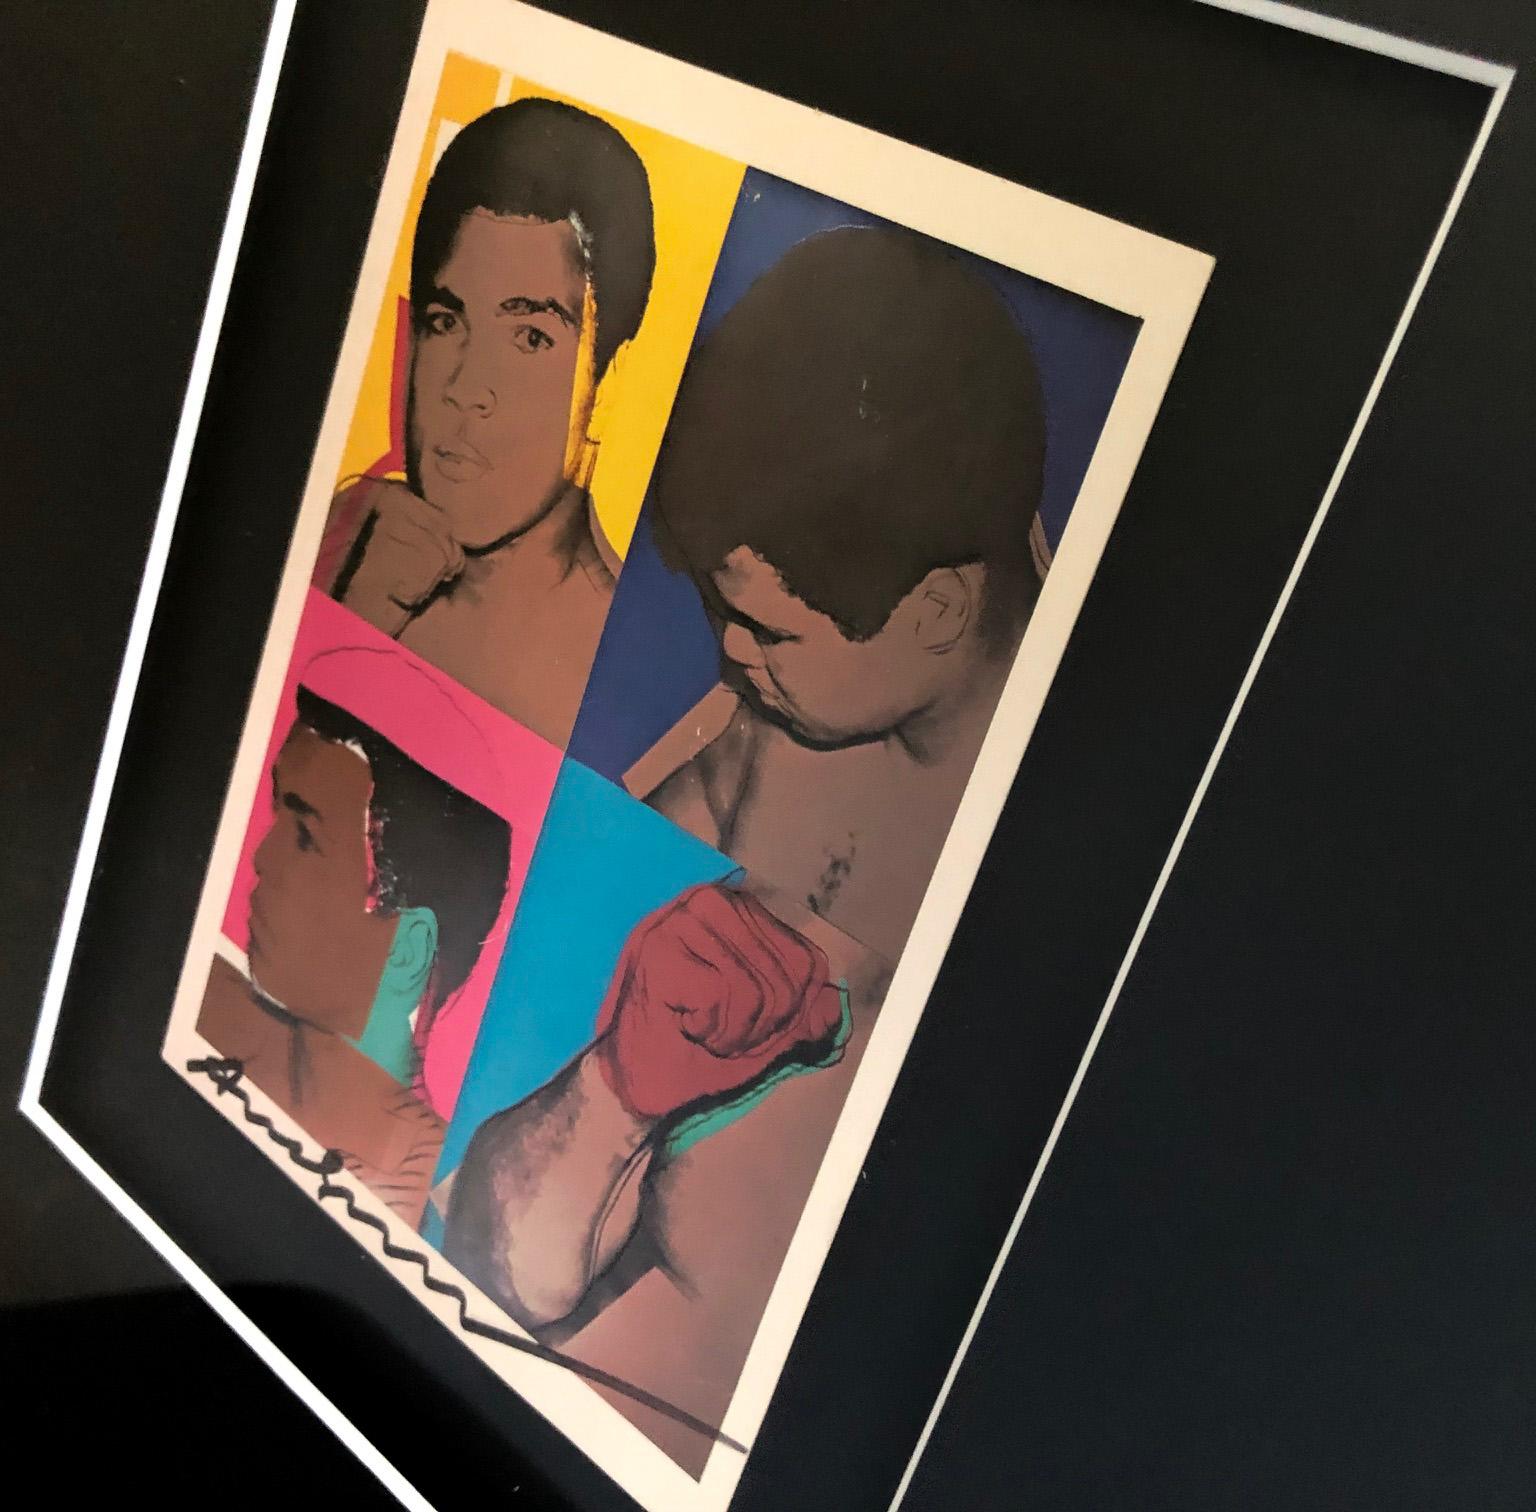 'Muhammad Ali' - Exhibition Card - Pop Art Print by (after) Andy Warhol